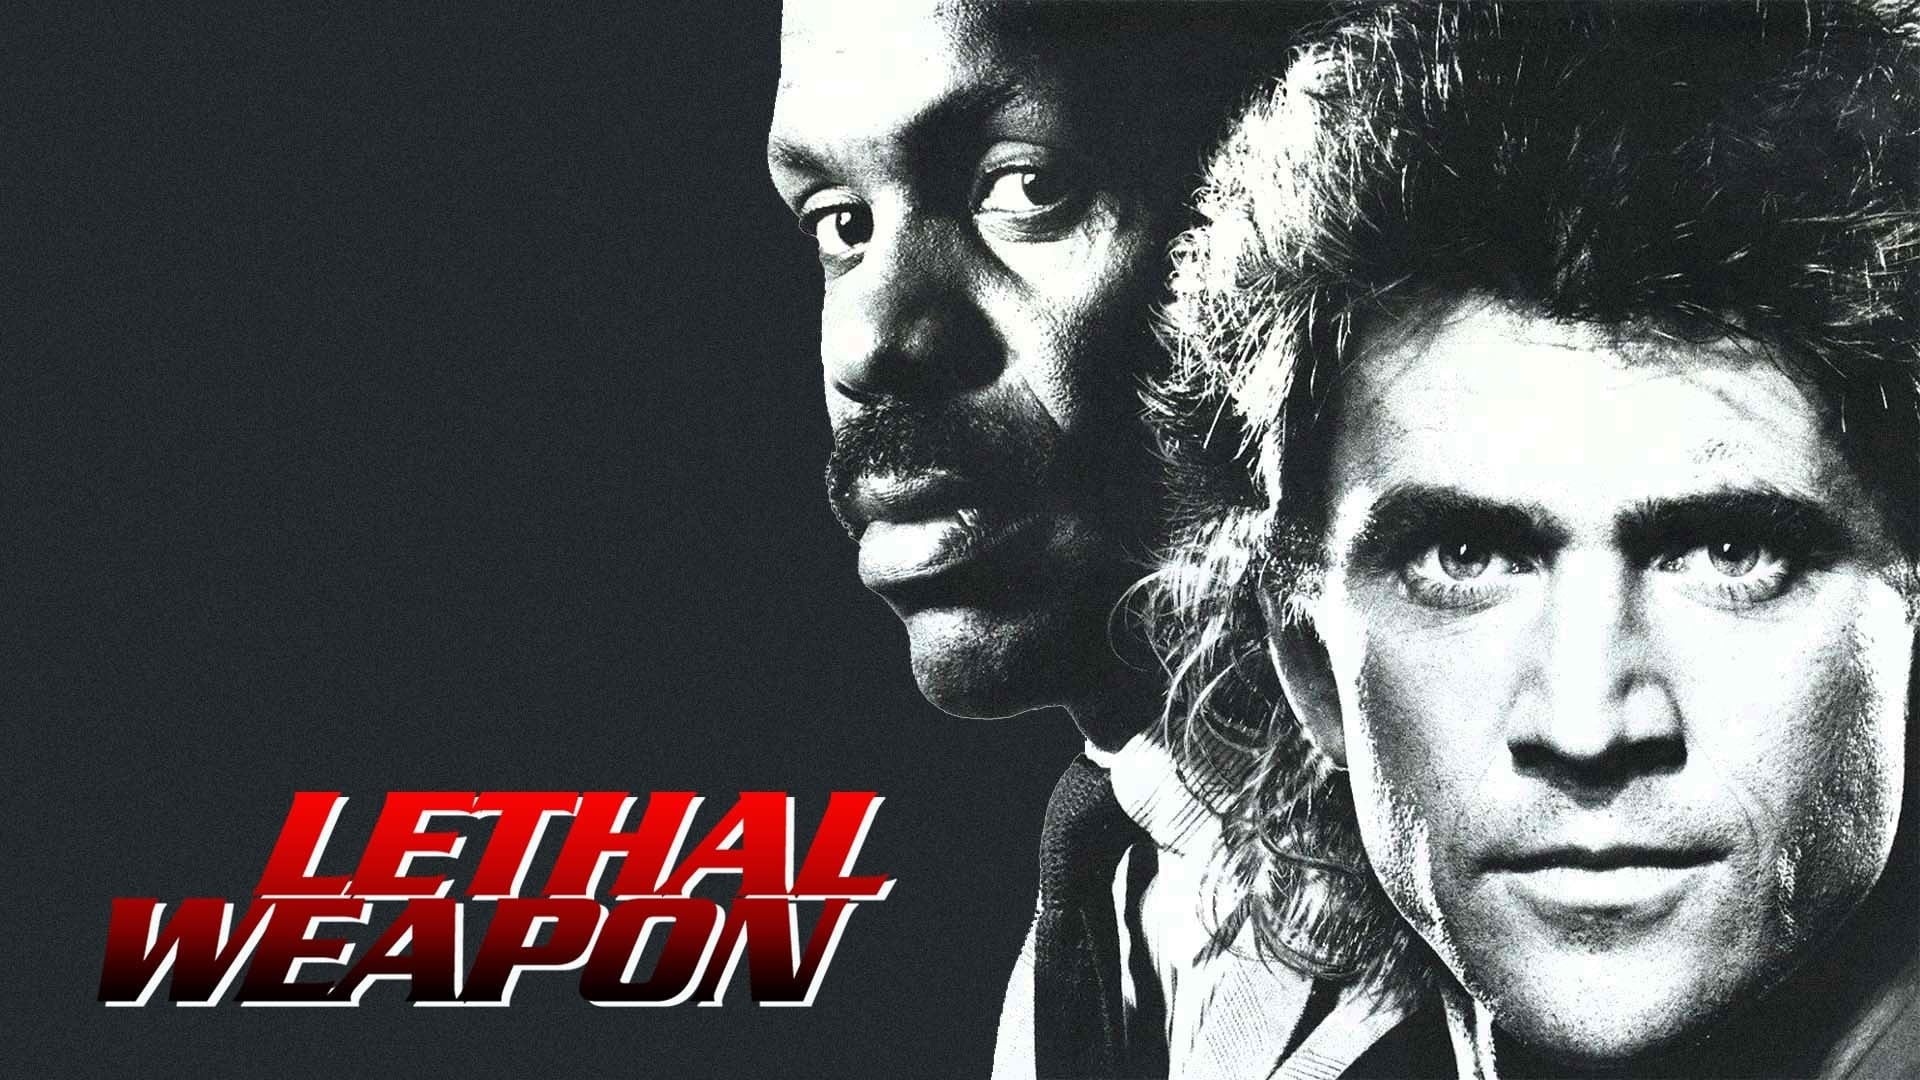 Lethal Weapon, Movies, Crime Action, Wallpapers, 1920x1080 Full HD Desktop